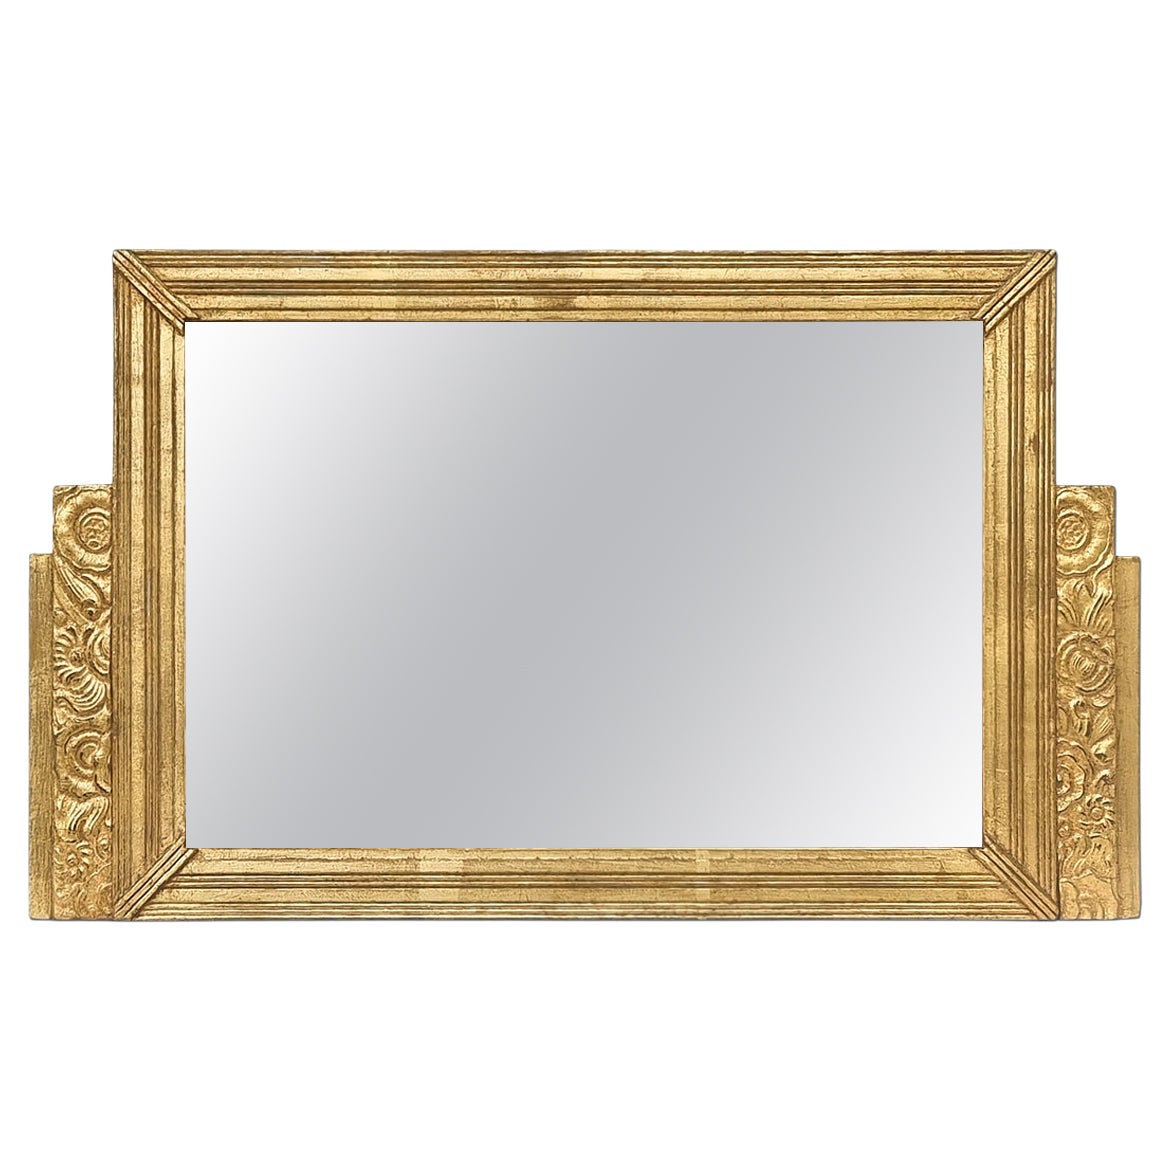 Antique French Art Deco Period Giltwood Wall Mirror, circa 1925 For Sale